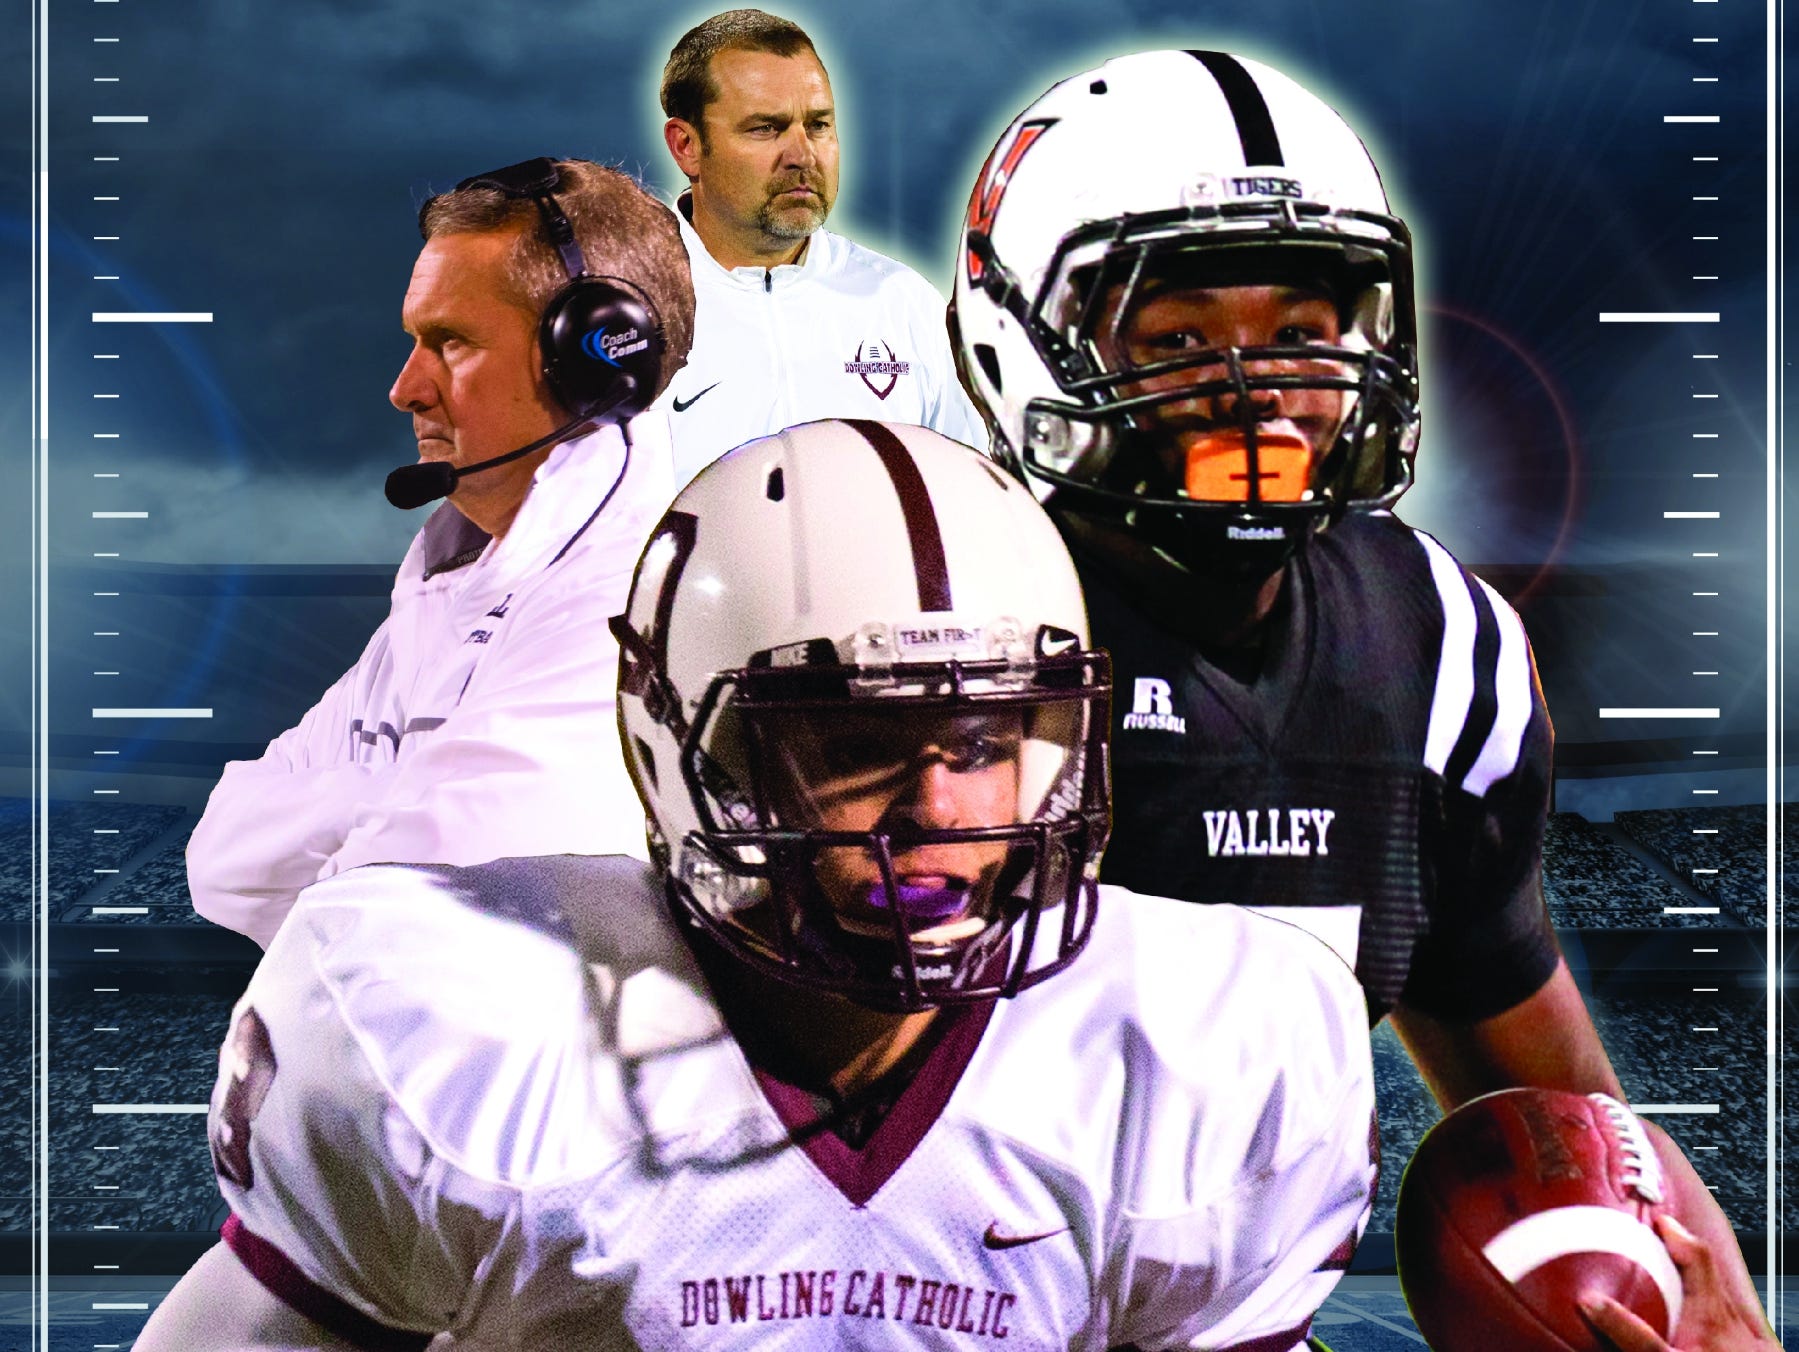 Valley and Dowling Iowa’s biggest prep football game — again USA